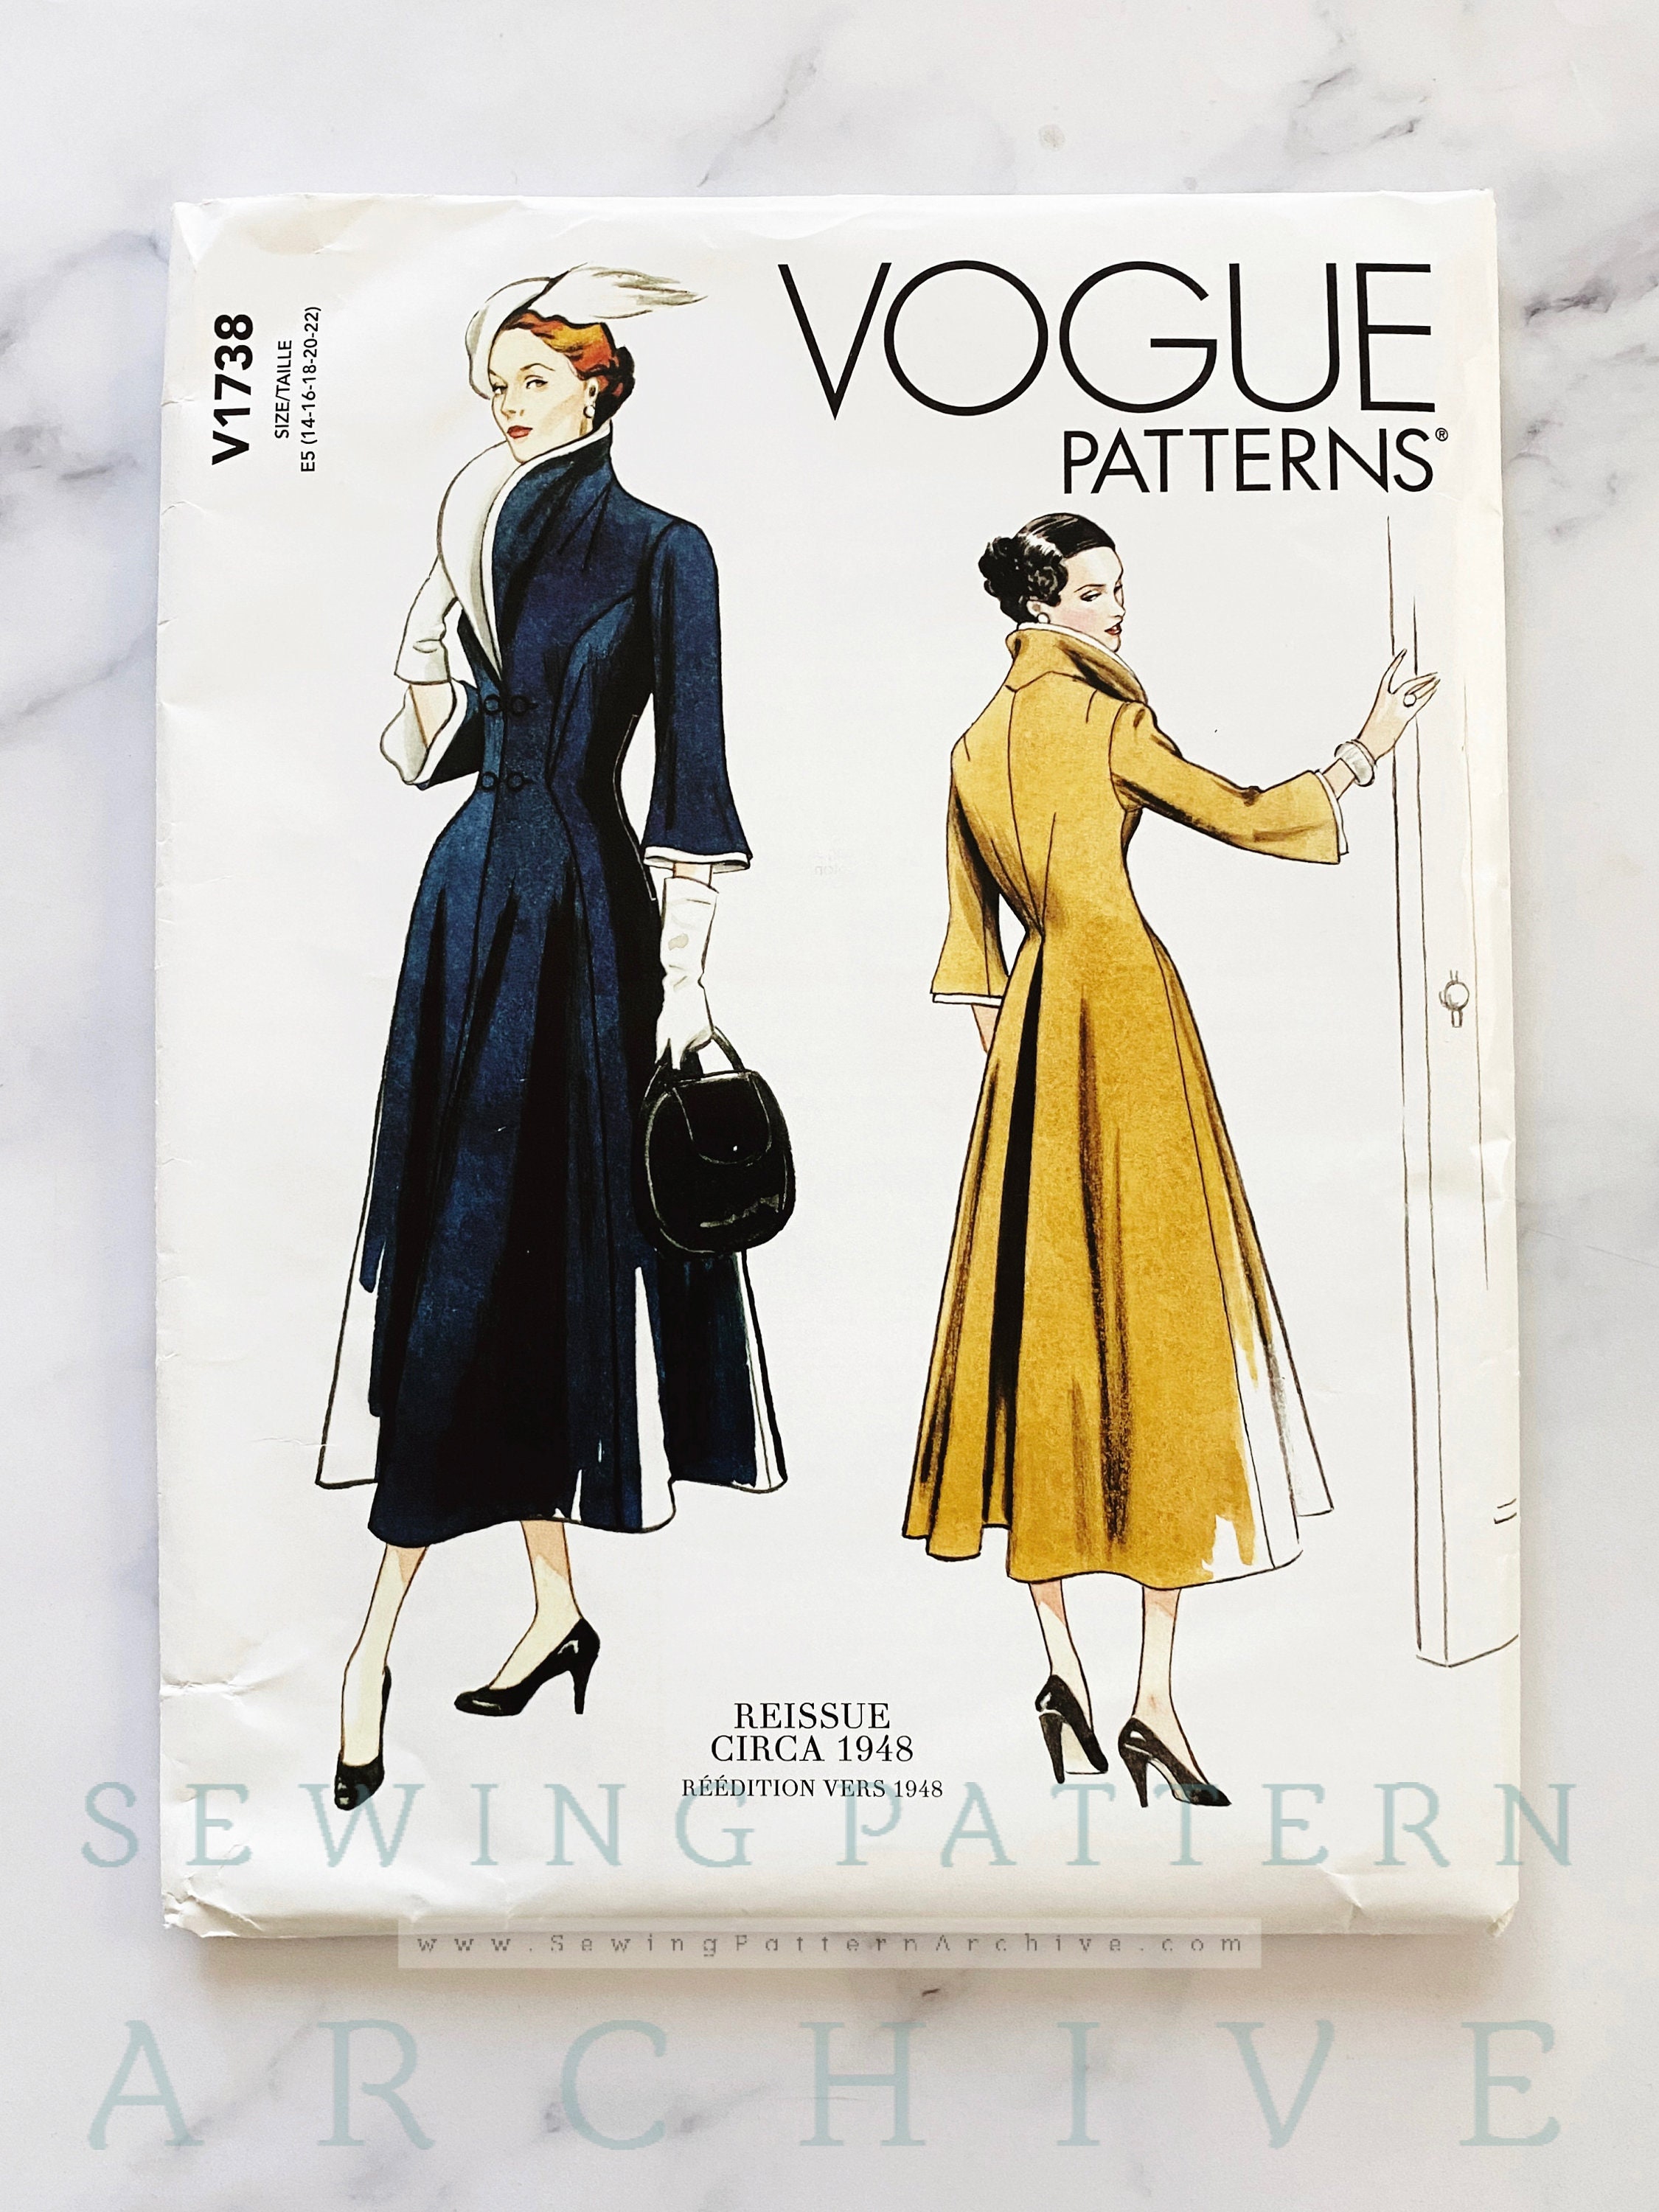 Pattern Storage Bags for Vintage Sewing Patterns. 20pcs. Archival Safe Poly  Bags Sewing Pattern Storage. Fits Simplicity, Vogue, Butterick 